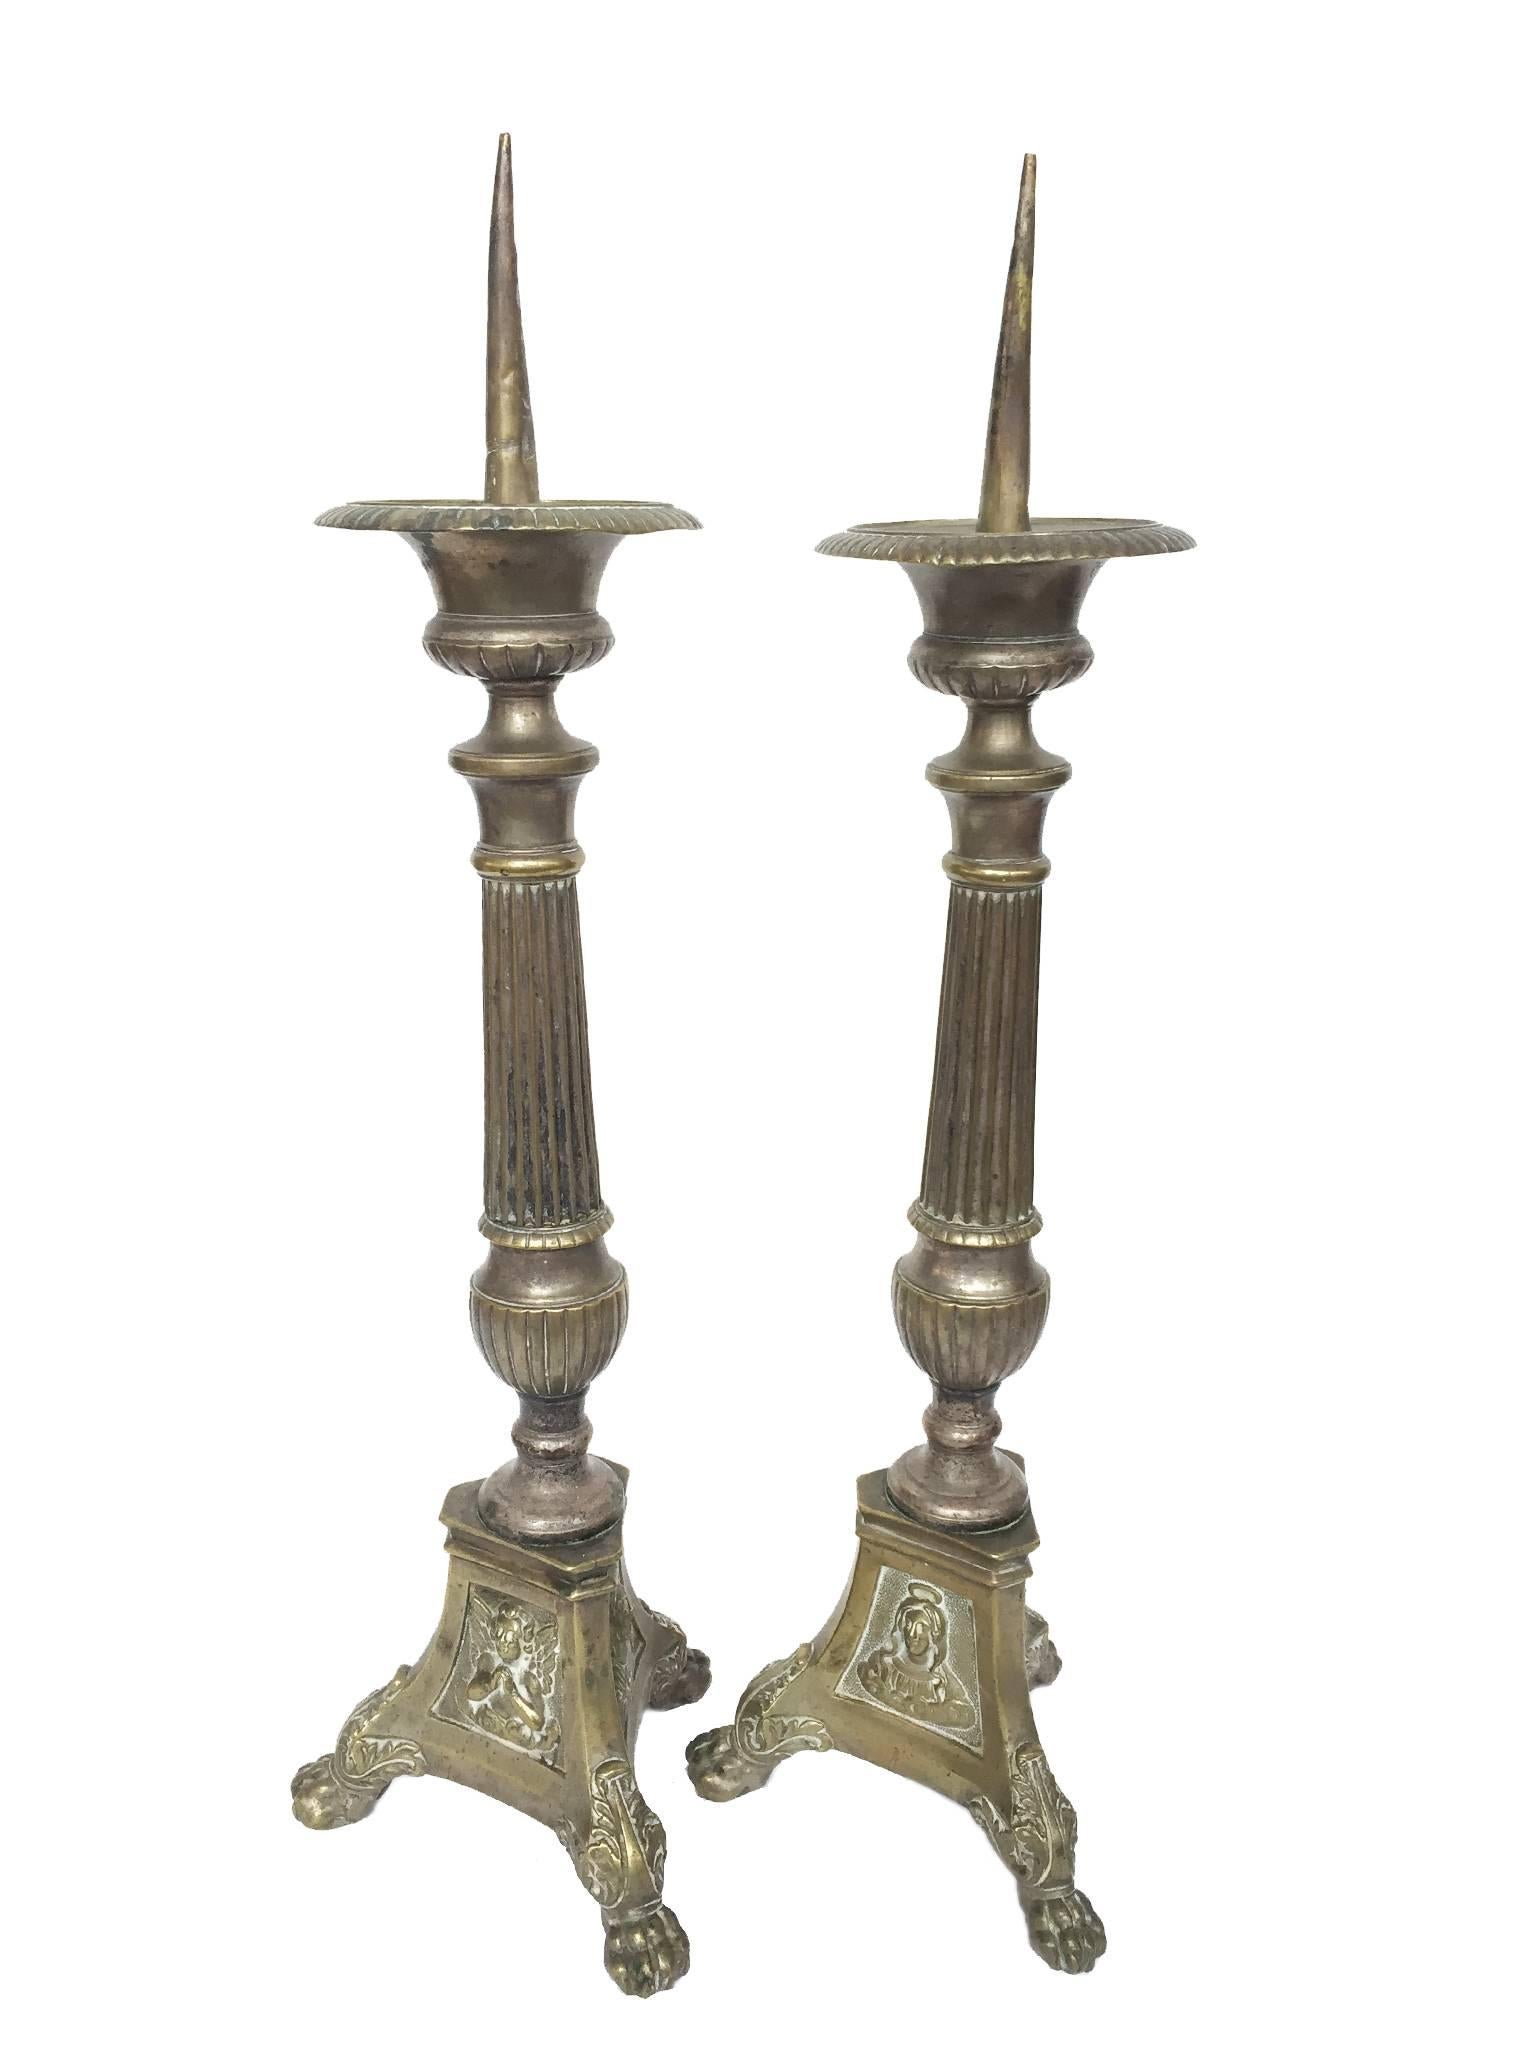 These two candleholders are comprised of brass with molded details. These include fluted stems with a triangular base that end in lion's feet. The three sides of the base bear an embossed image of Jesus Christ, the Virgin Mary, and a cherubic angel.